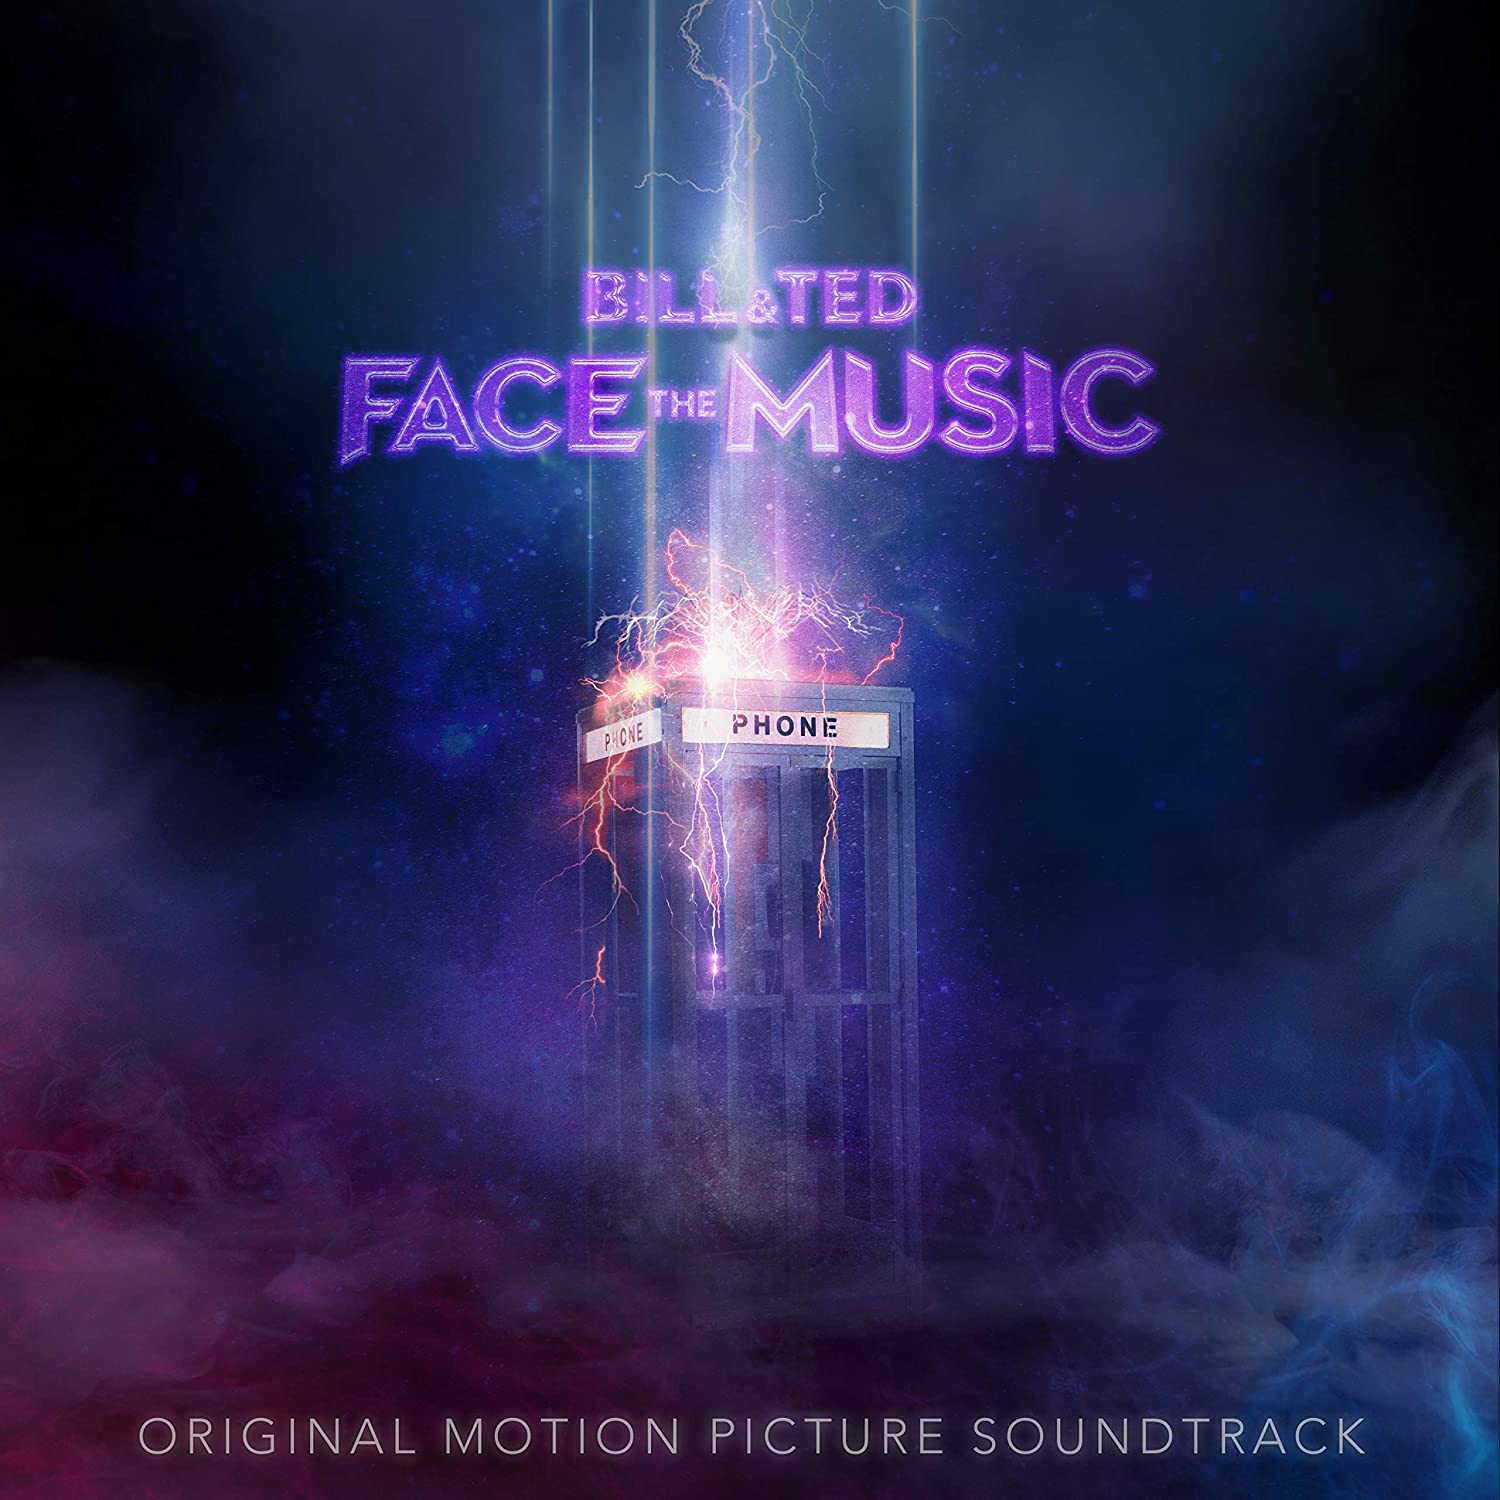 Mark Isham - Bill & Ted Face the Music (Original Motion Picture Soundtrack)